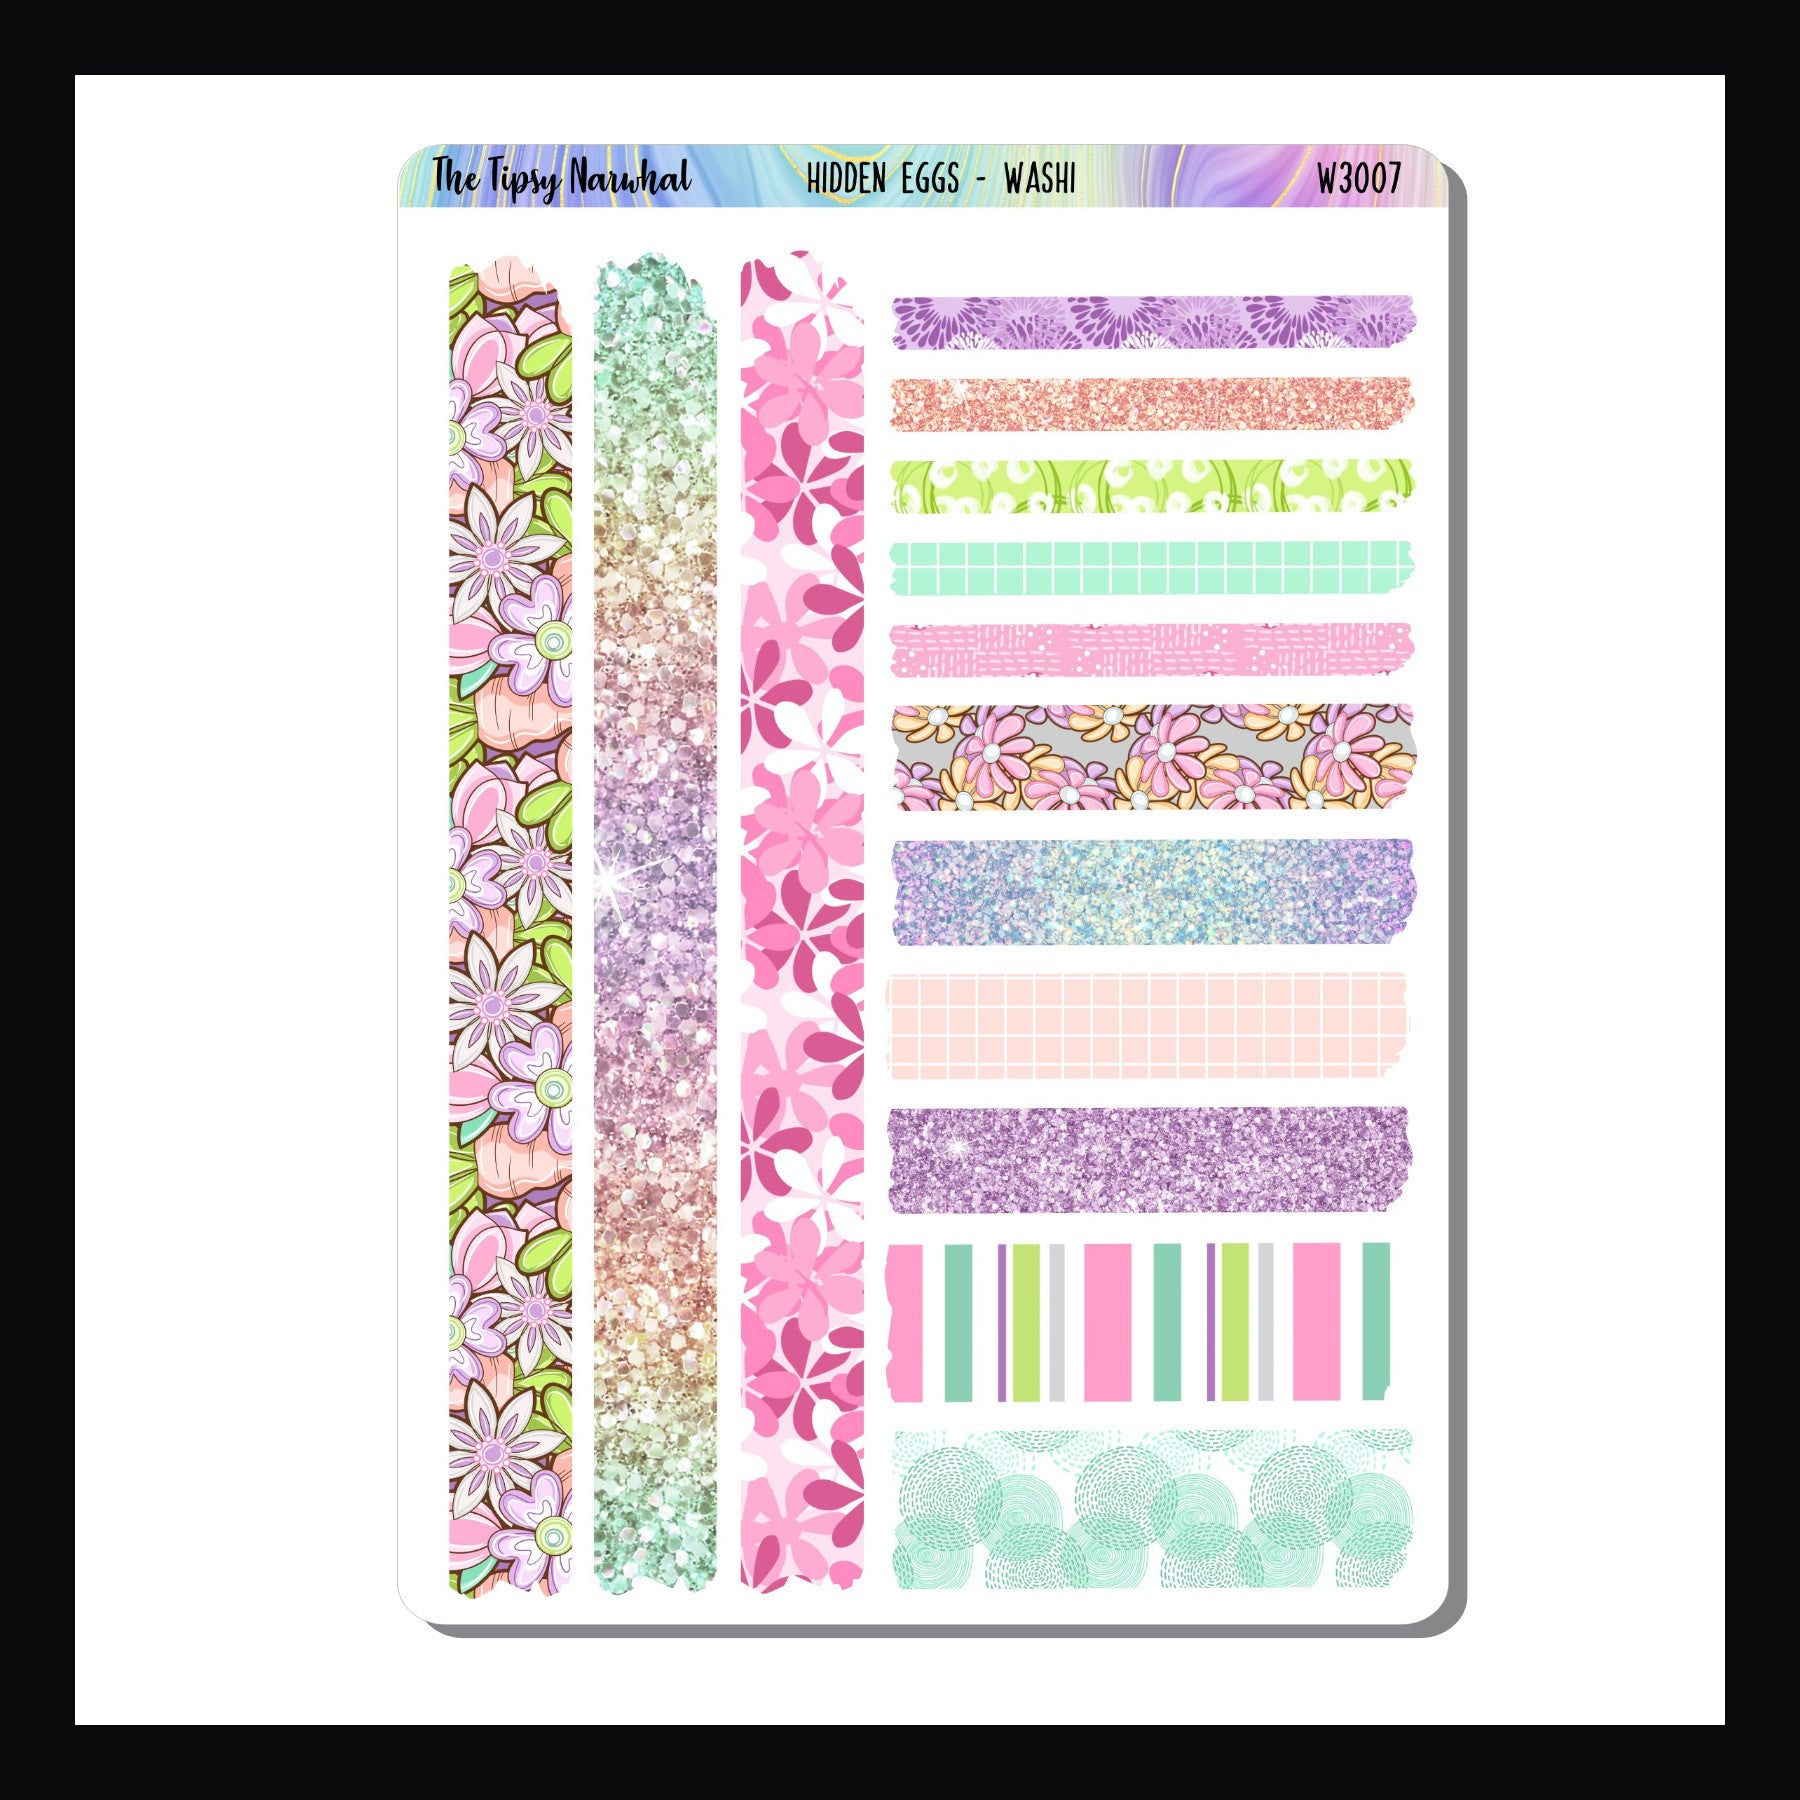 Hidden Eggs Journal Kit - Washi sheet add-on.  The Washi sheet features multiple washi strip stickers in varying sizes.  Each sticker coordinates with the Hidden Eggs design.